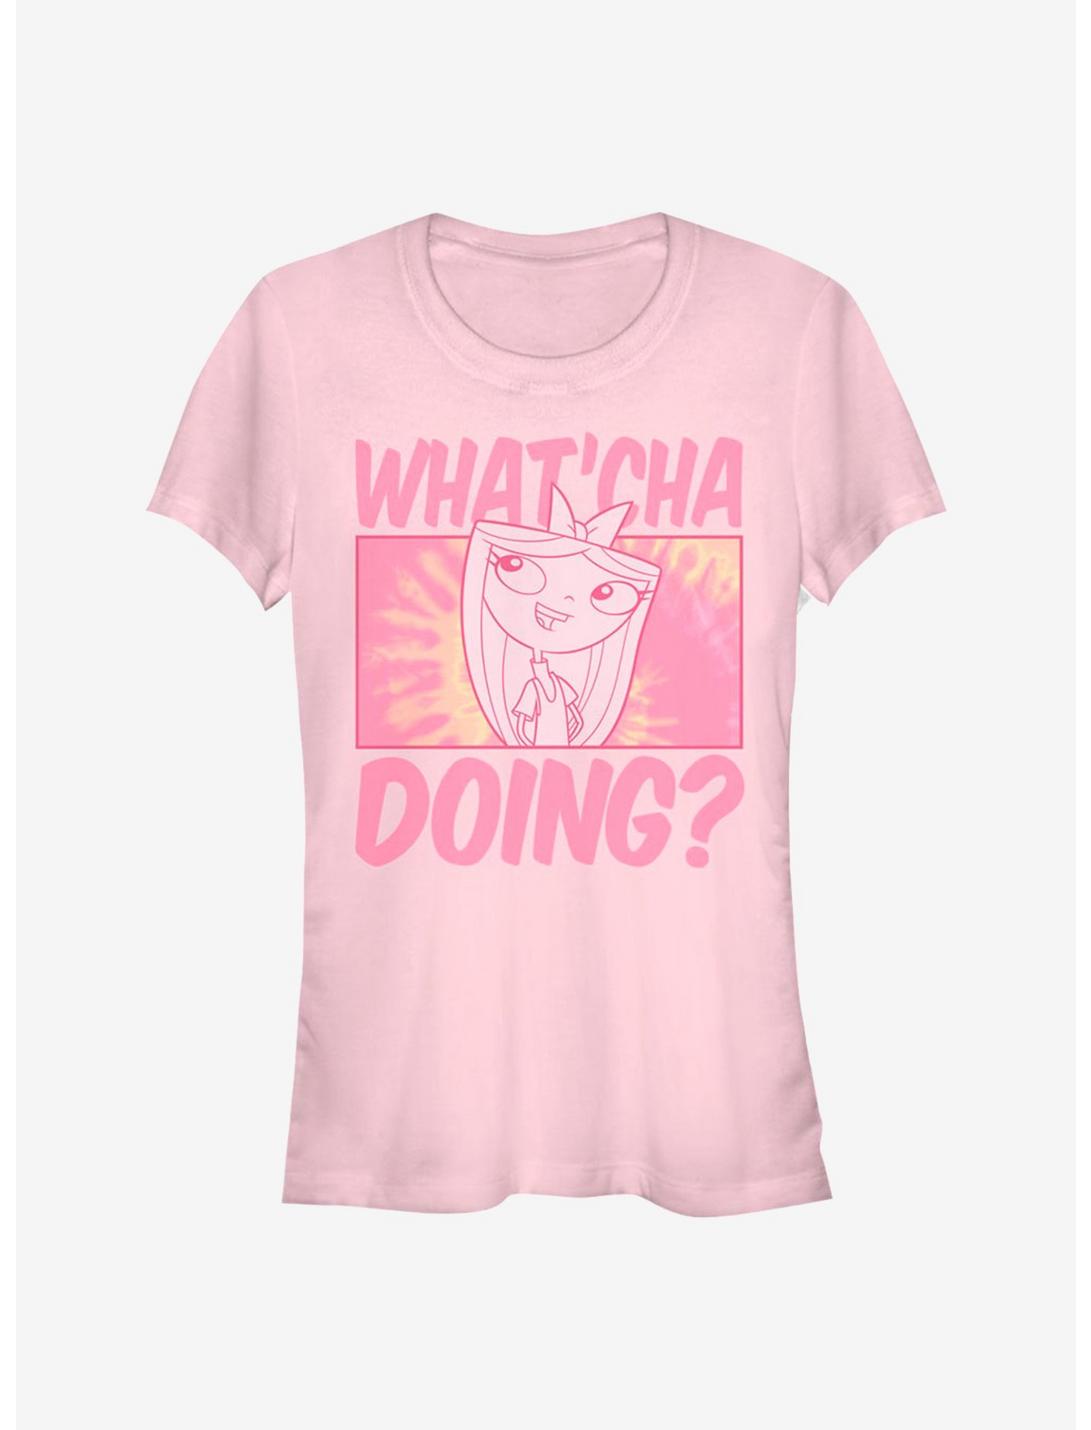 Disney Phineas And Ferb What'cha Doing Girls T-Shirt, LIGHT PINK, hi-res